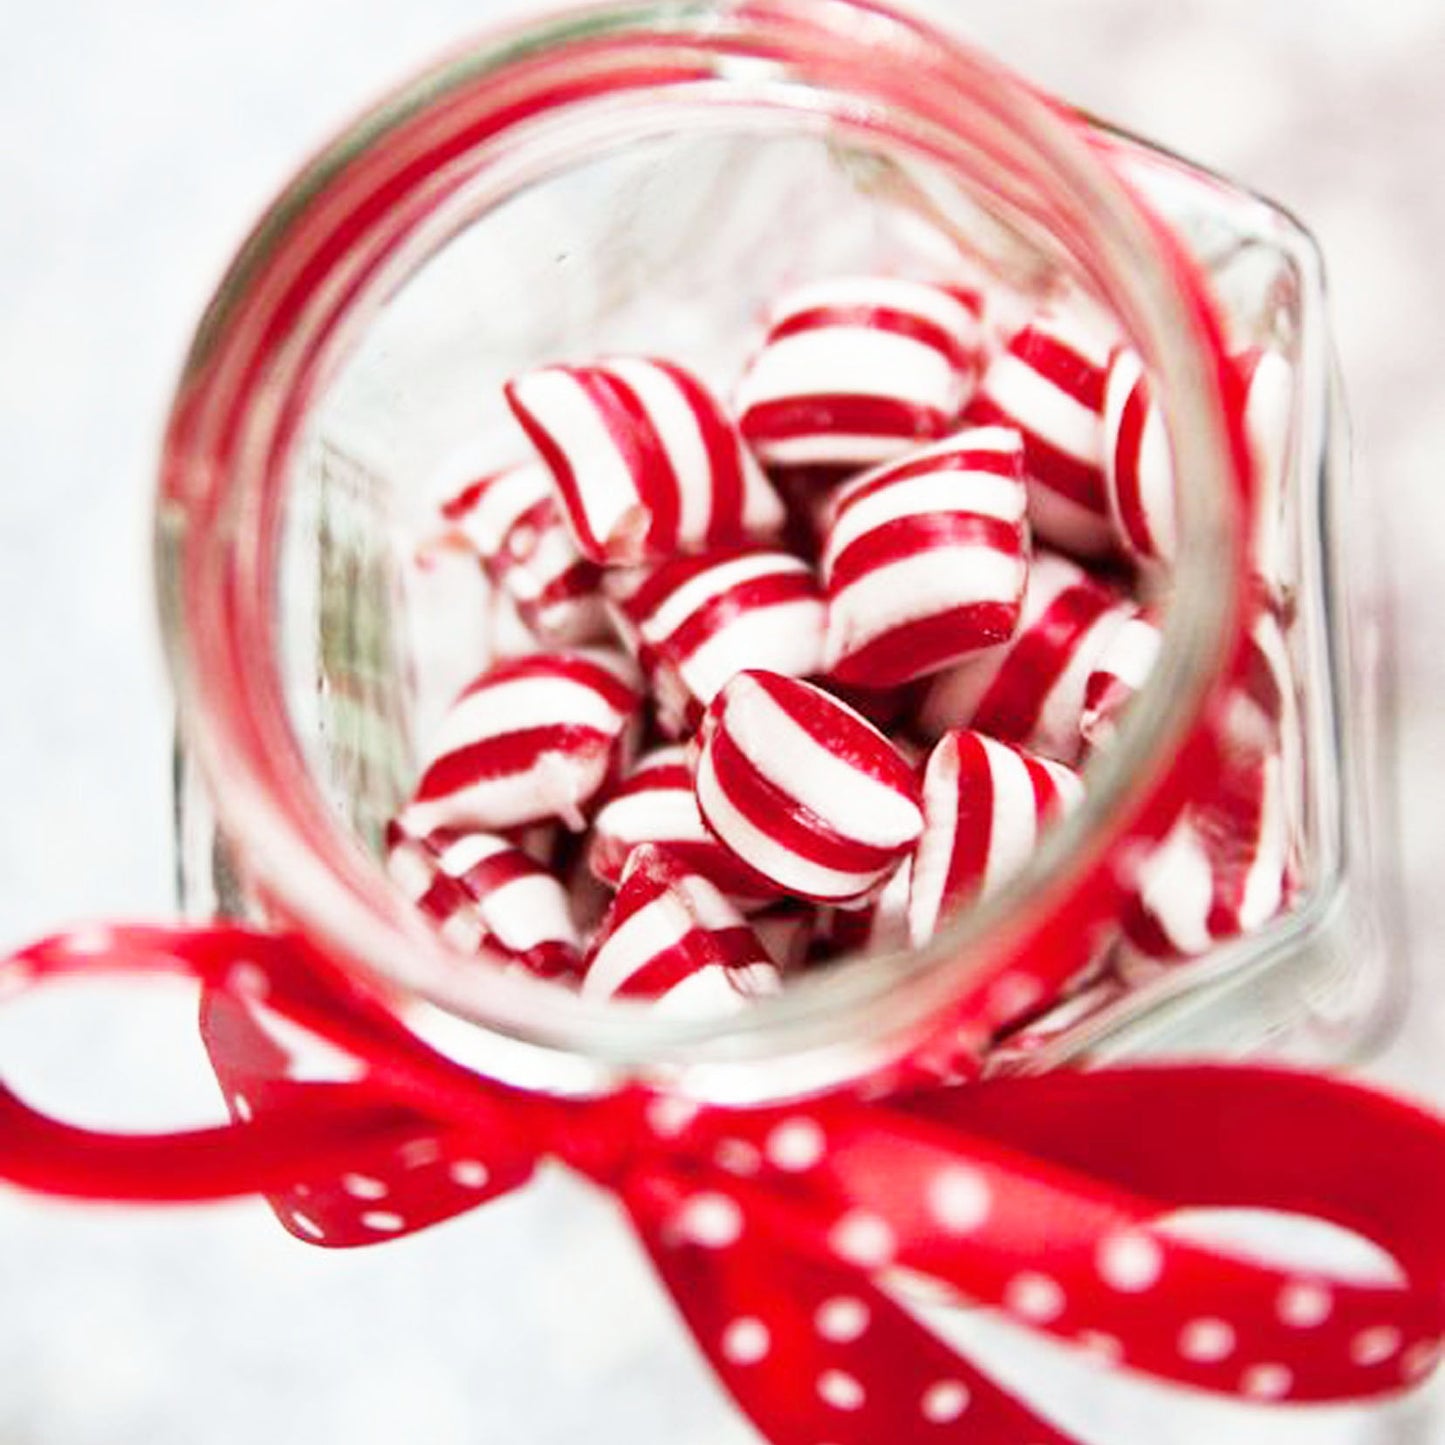 Twisted Peppermint Fragrance Oil | Truly Personal | Candles, Wax Melts, Soap, Bath Bombs